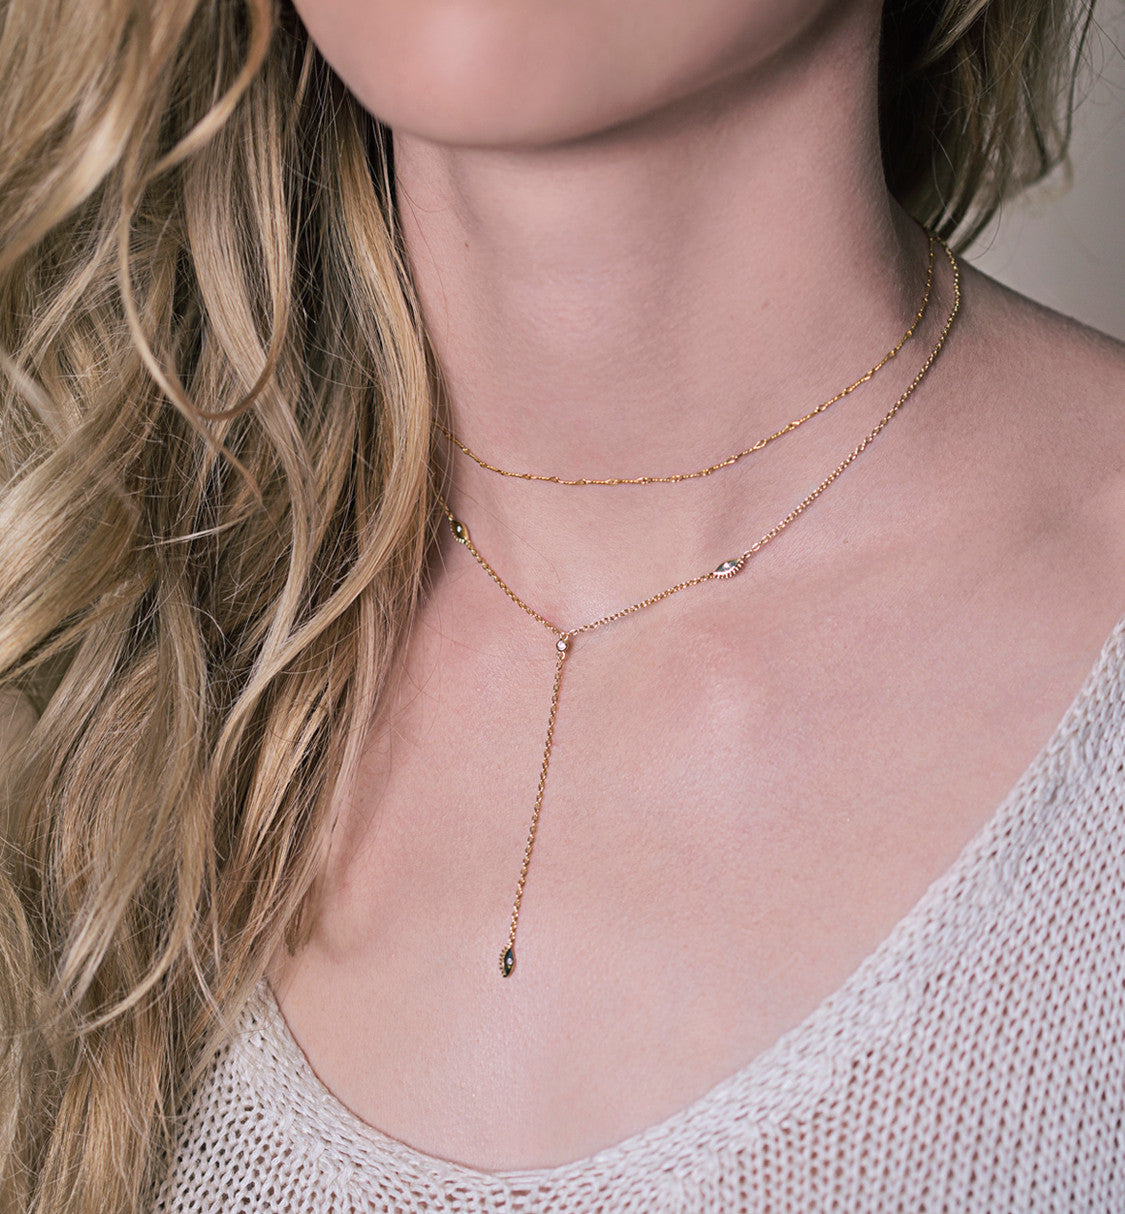 Aila Choker Lariat Necklace, Necklaces - AMY O. Jewelry